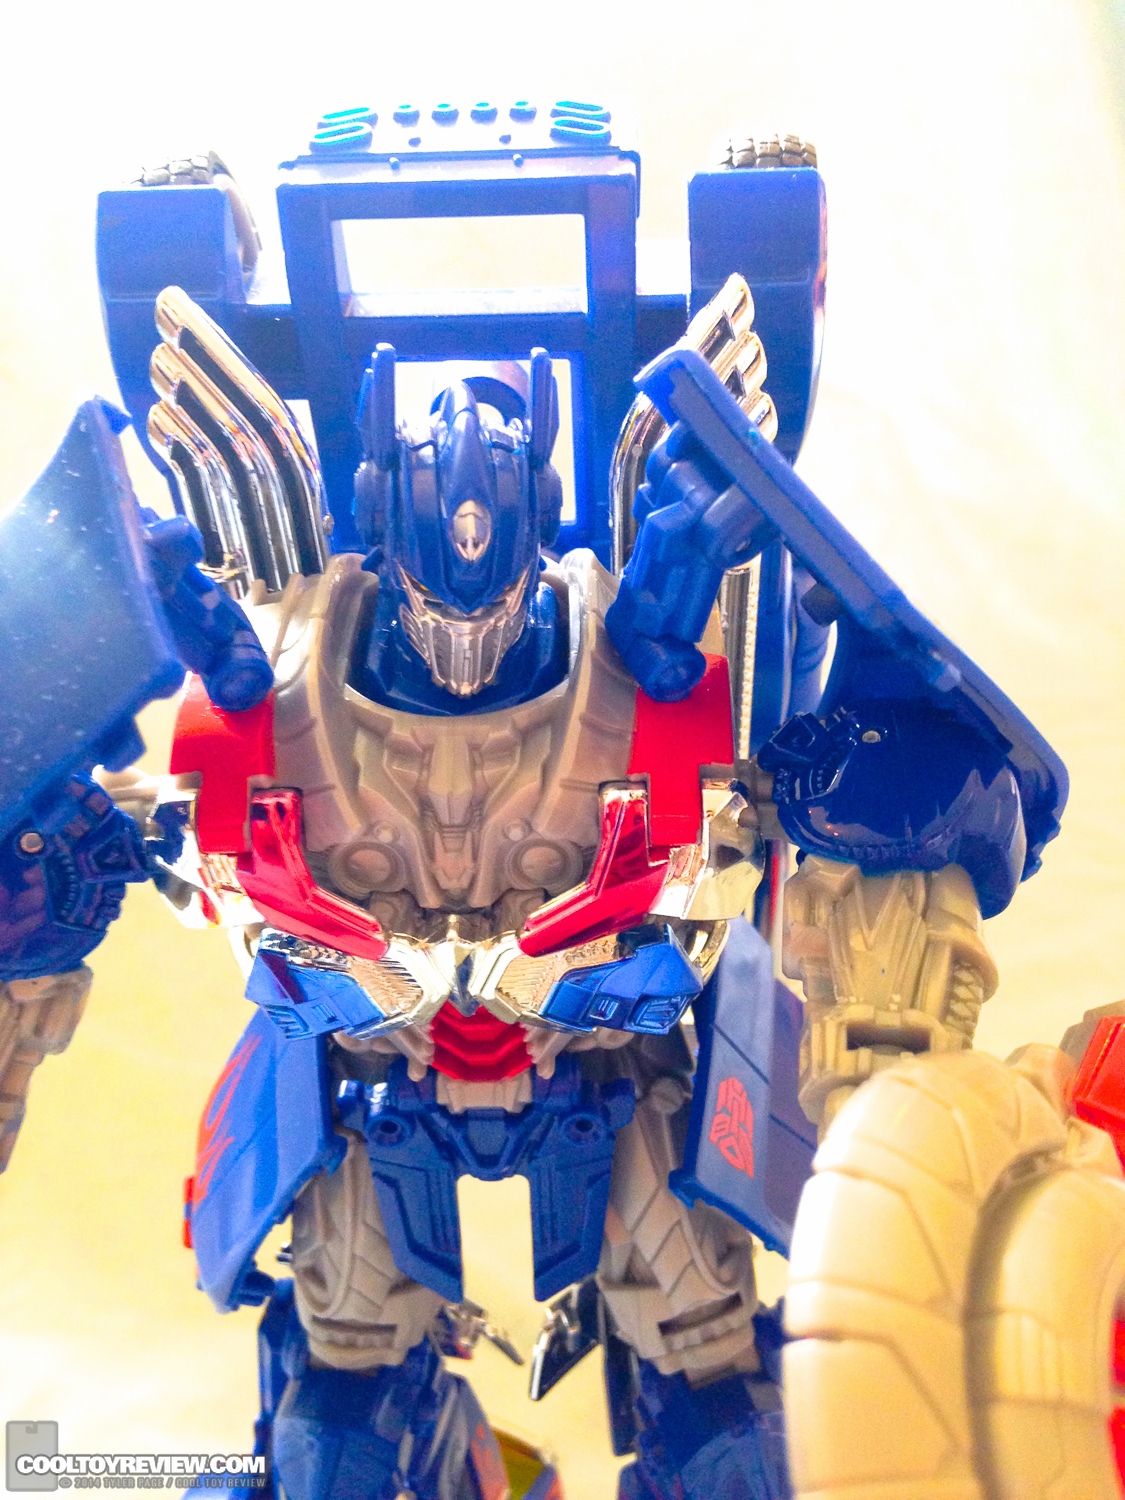 Transformers-Age-of-Extinction-Hasbro-Action-Figures-Review-024.jpg